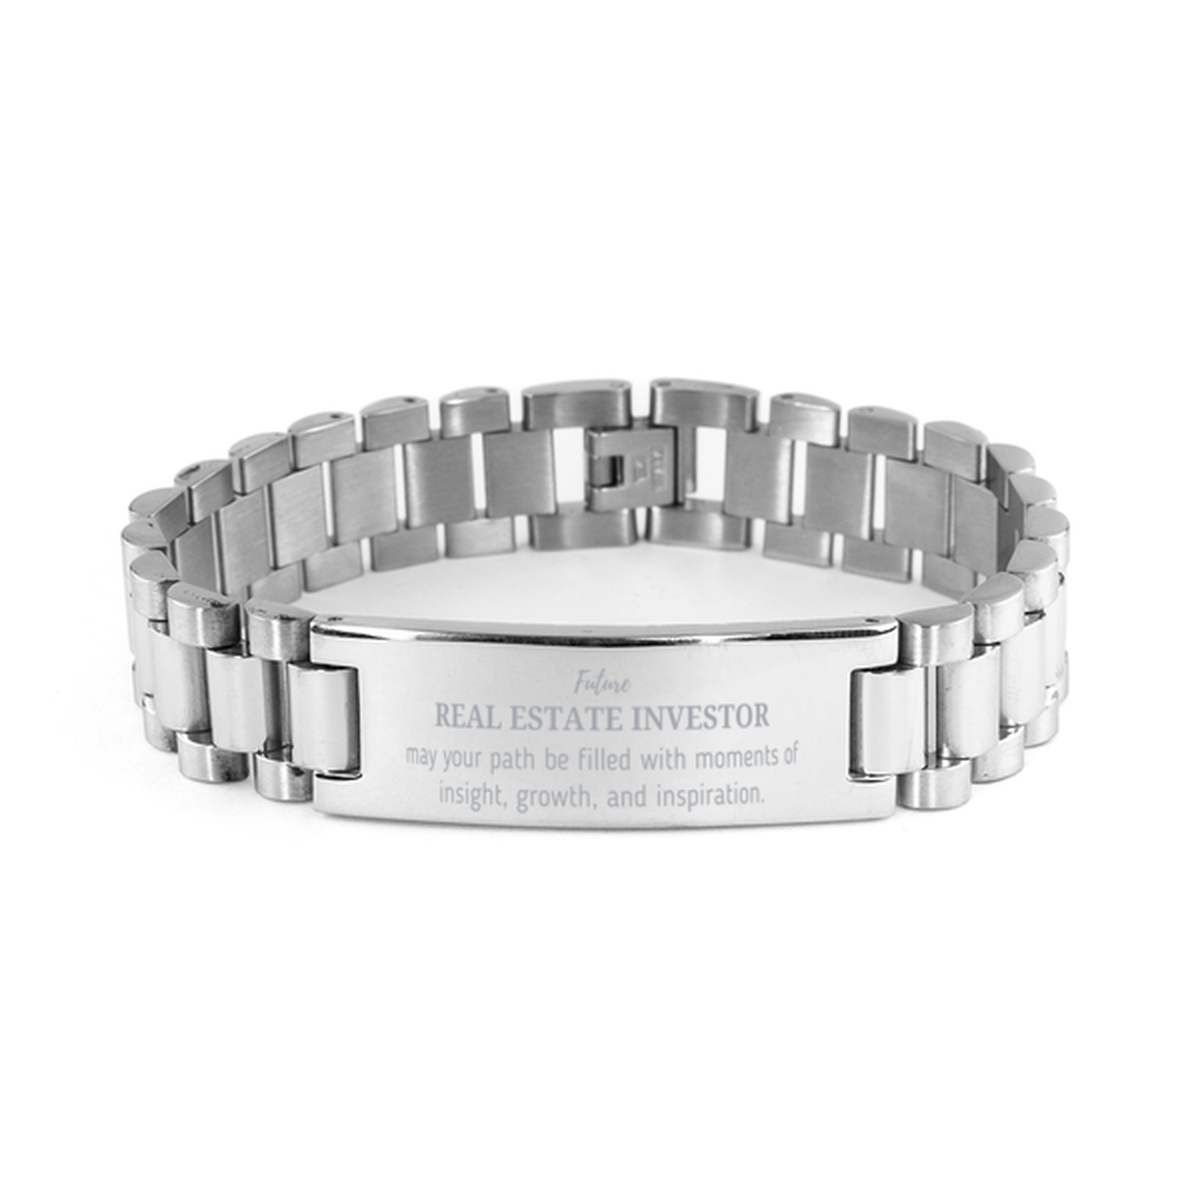 Future Real Estate Investor Gifts, May your path be filled with moments of insight, Graduation Gifts for New Real Estate Investor, Christmas Unique Ladder Stainless Steel Bracelet For Men, Women, Friends